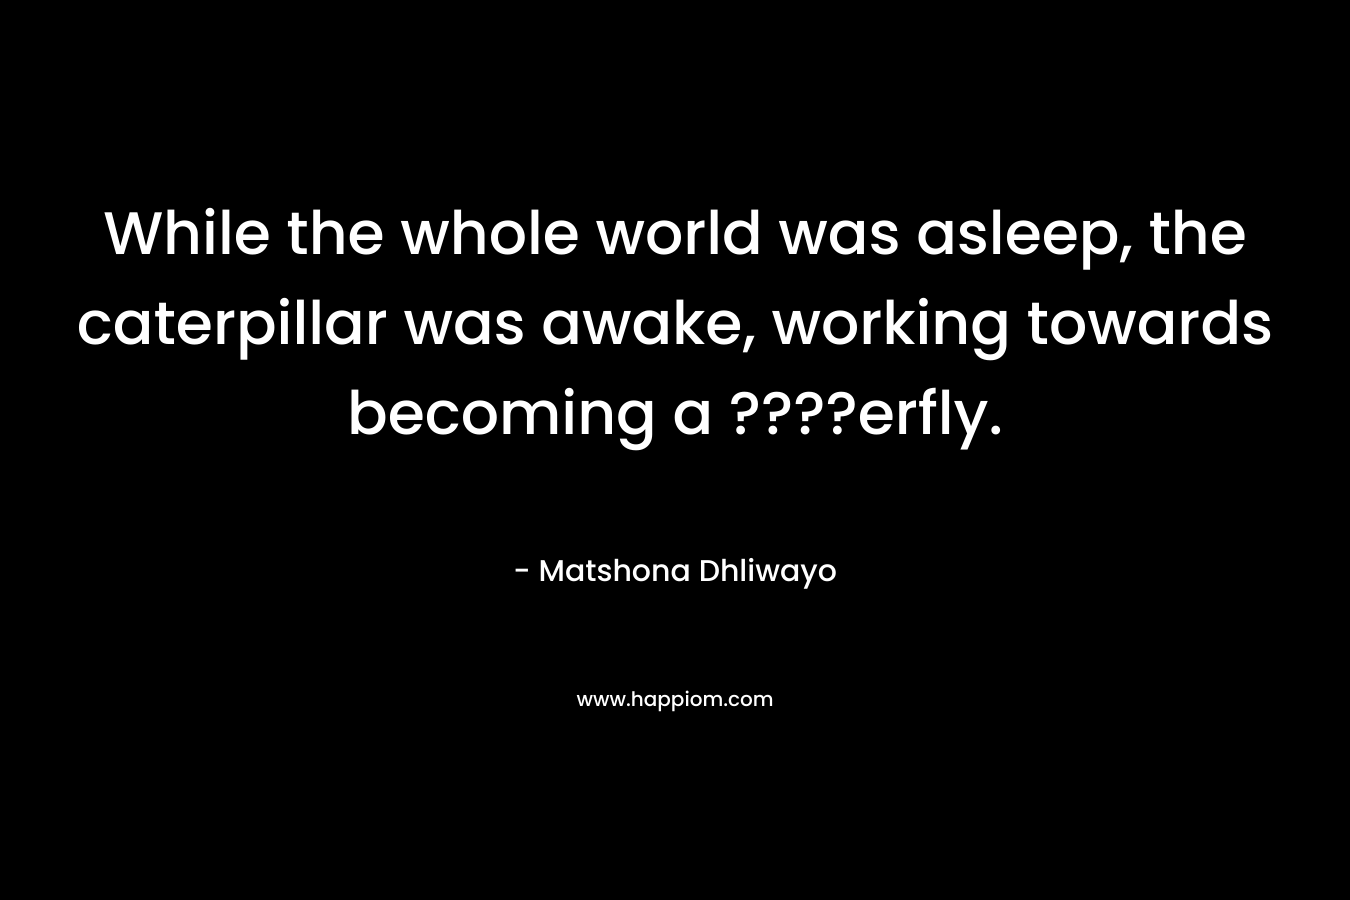 While the whole world was asleep, the caterpillar was awake, working towards becoming a ????erfly.